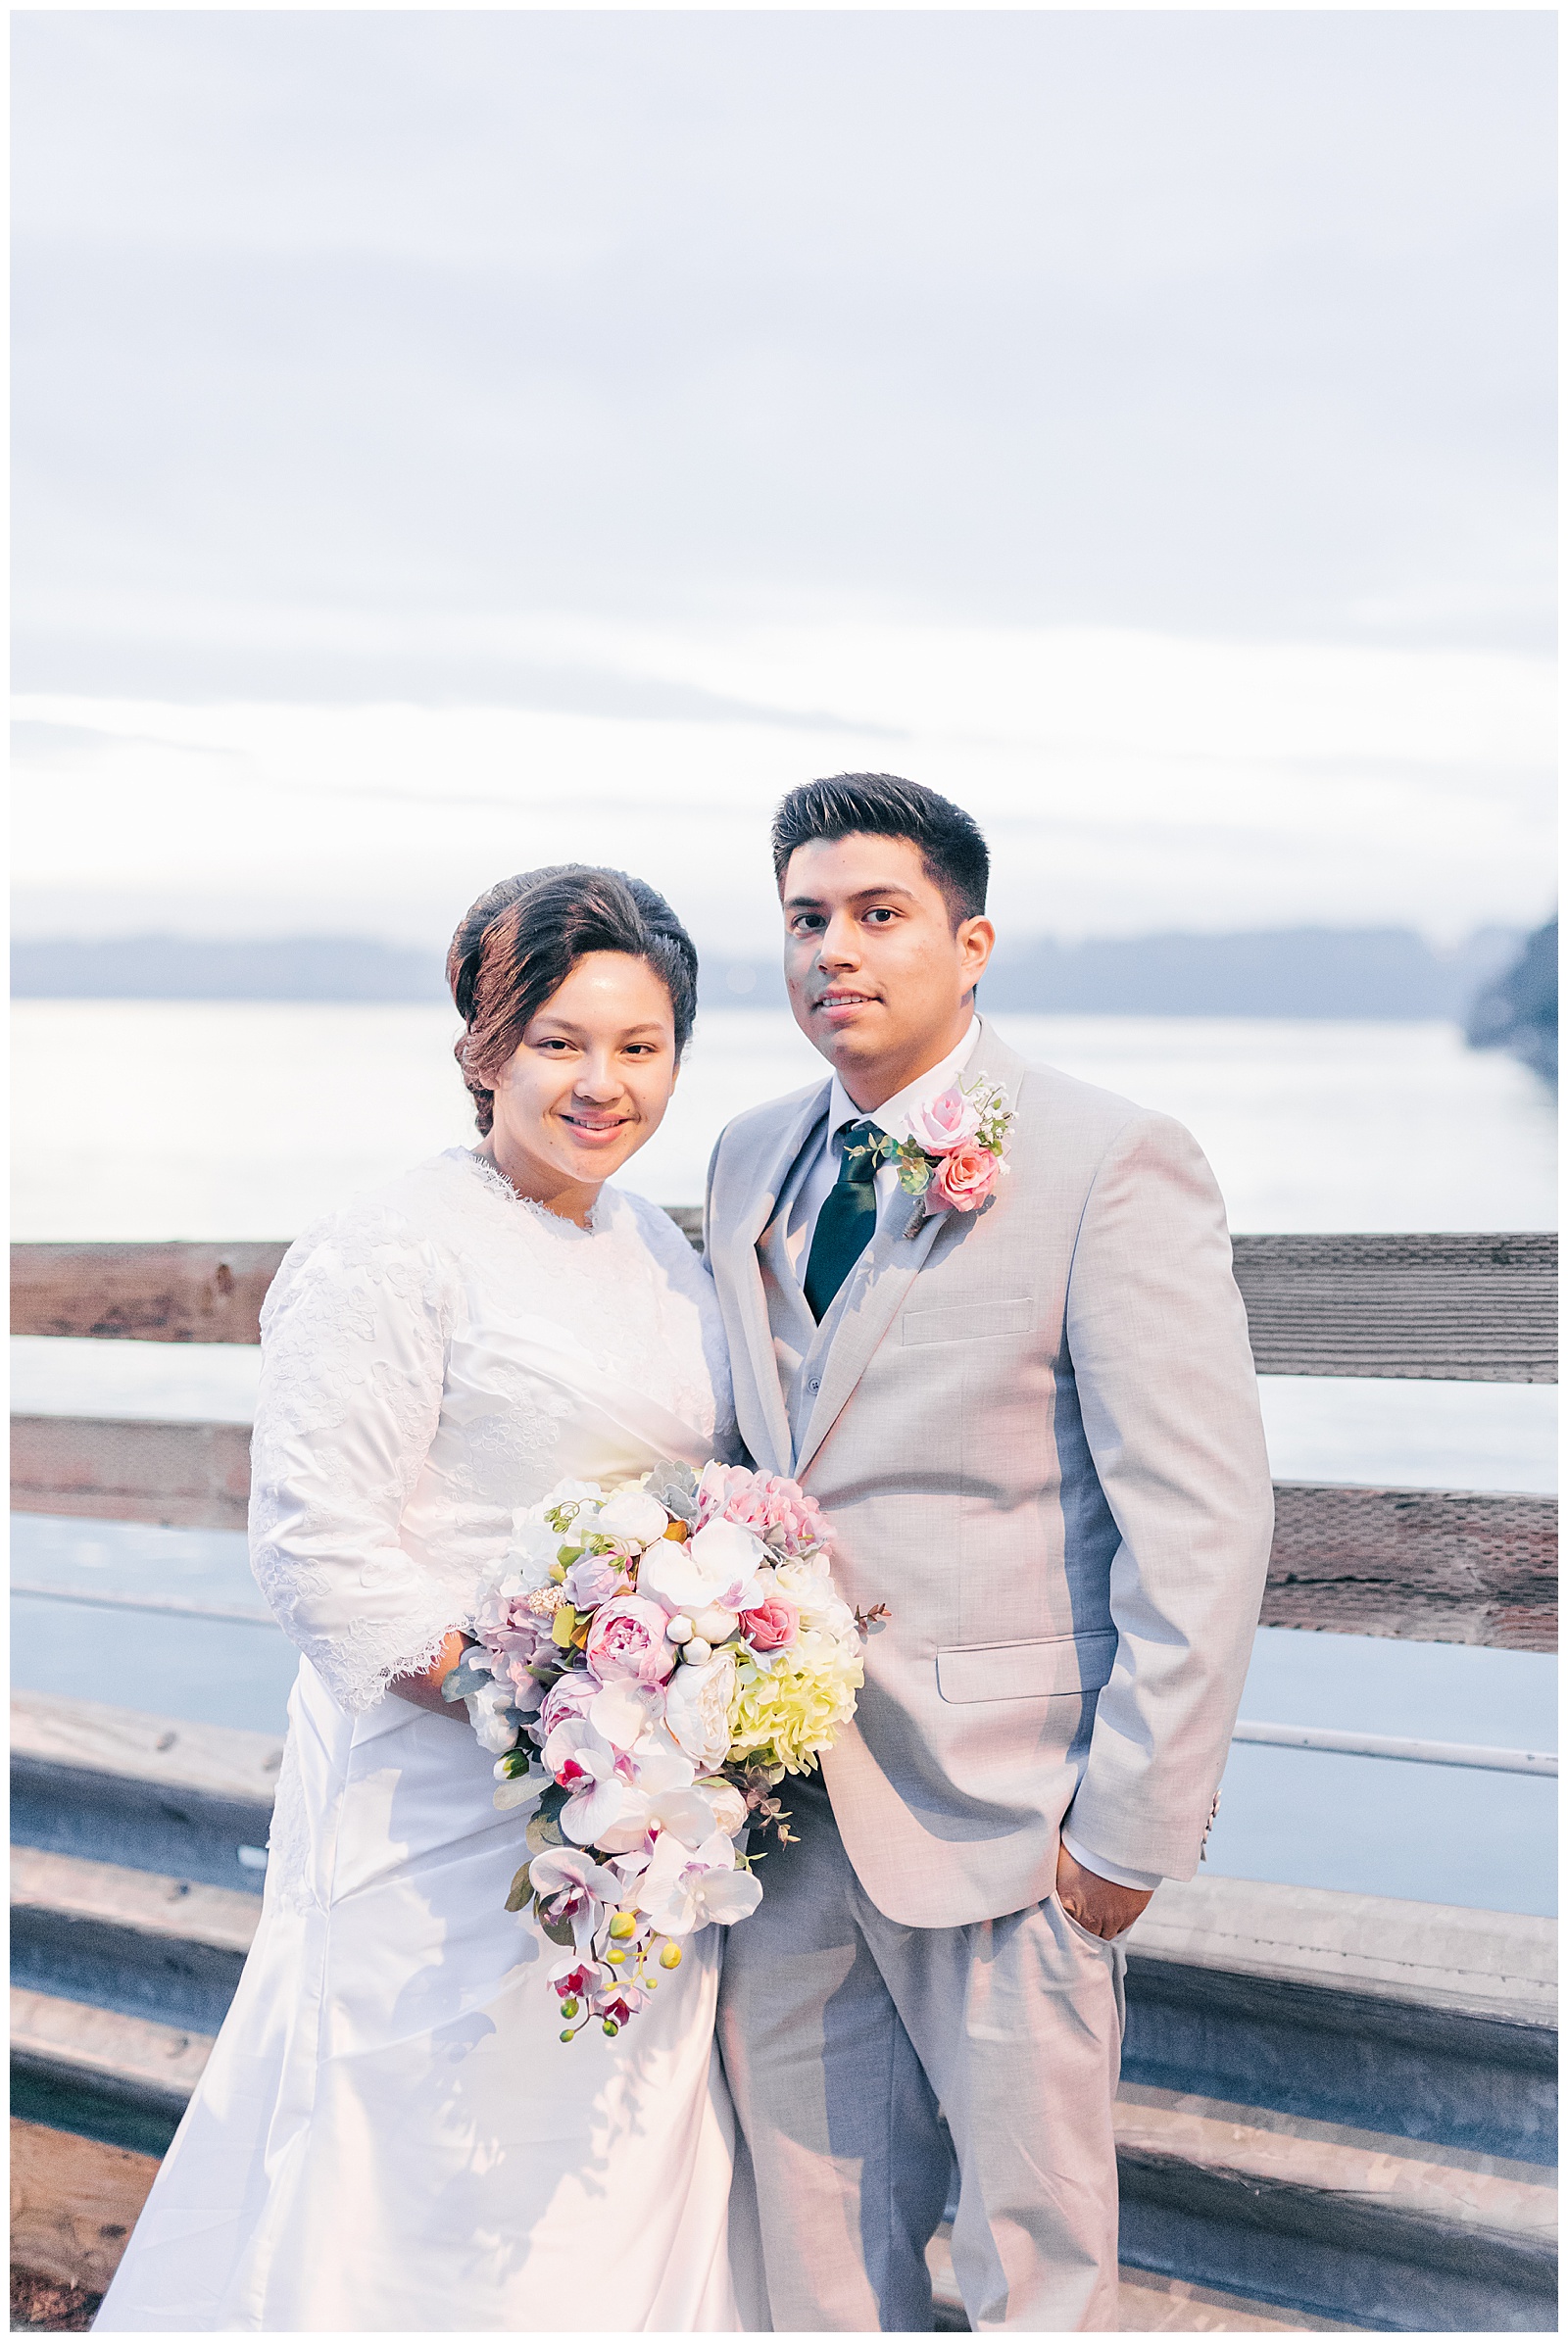 Bride and groom portrait at Tahlequah Ferry Terminal